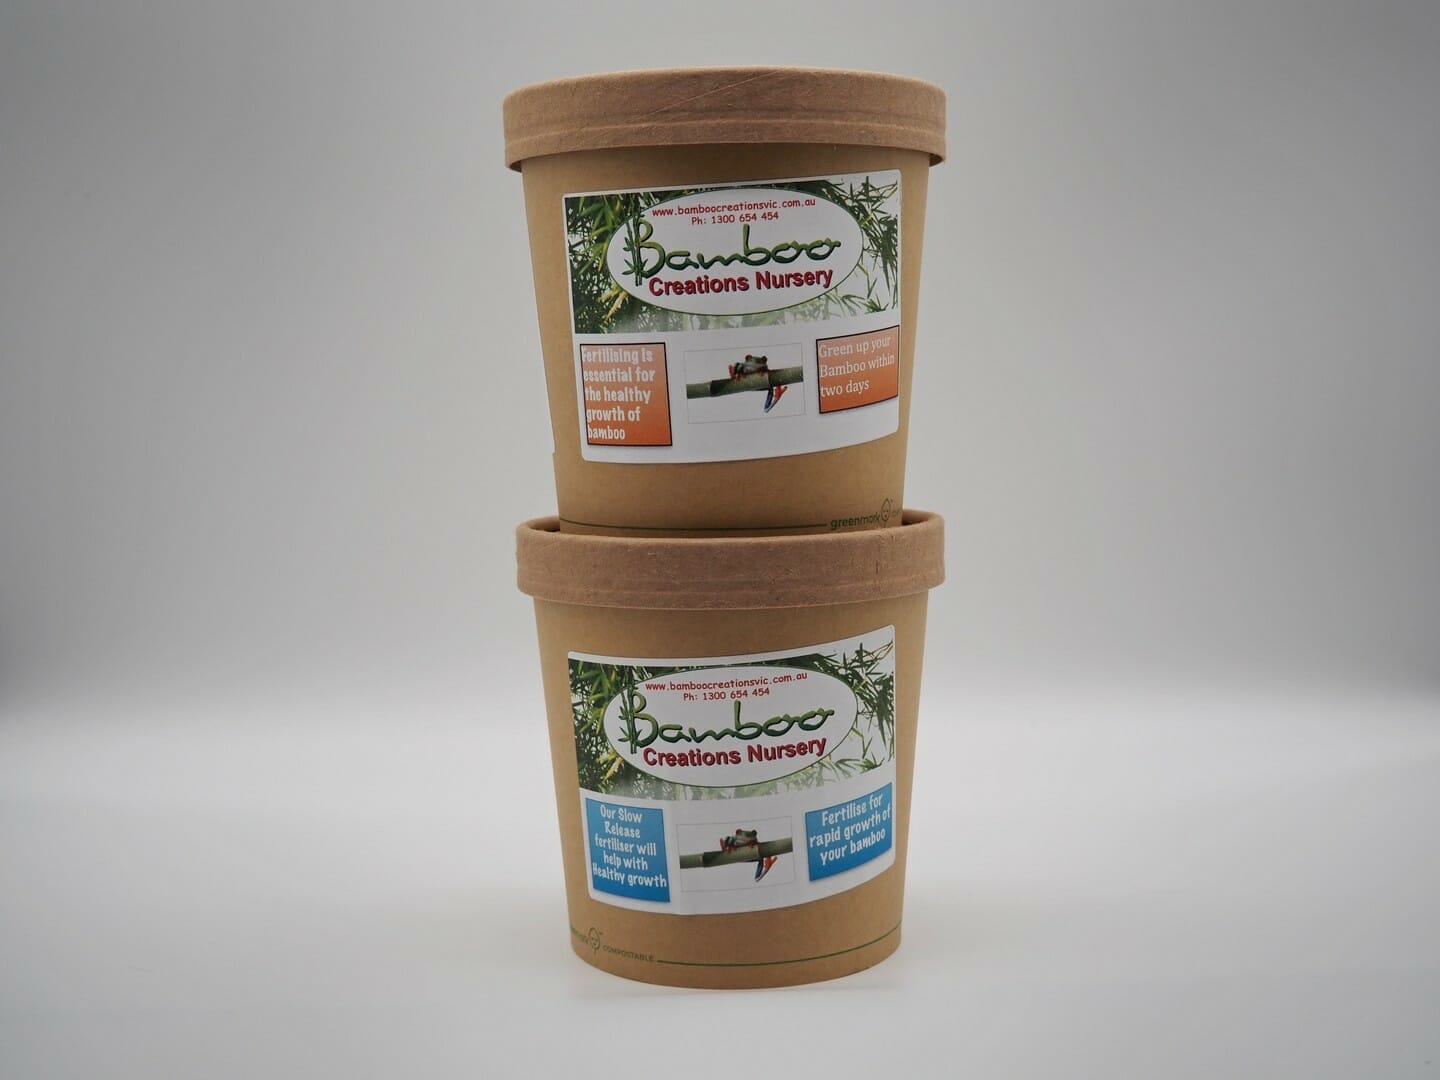 Bundle pack - 453g specialist bamboo nitrogen and 453g specialist bamboo fertiliser, in an eco-friendly, compostable container, with lid.